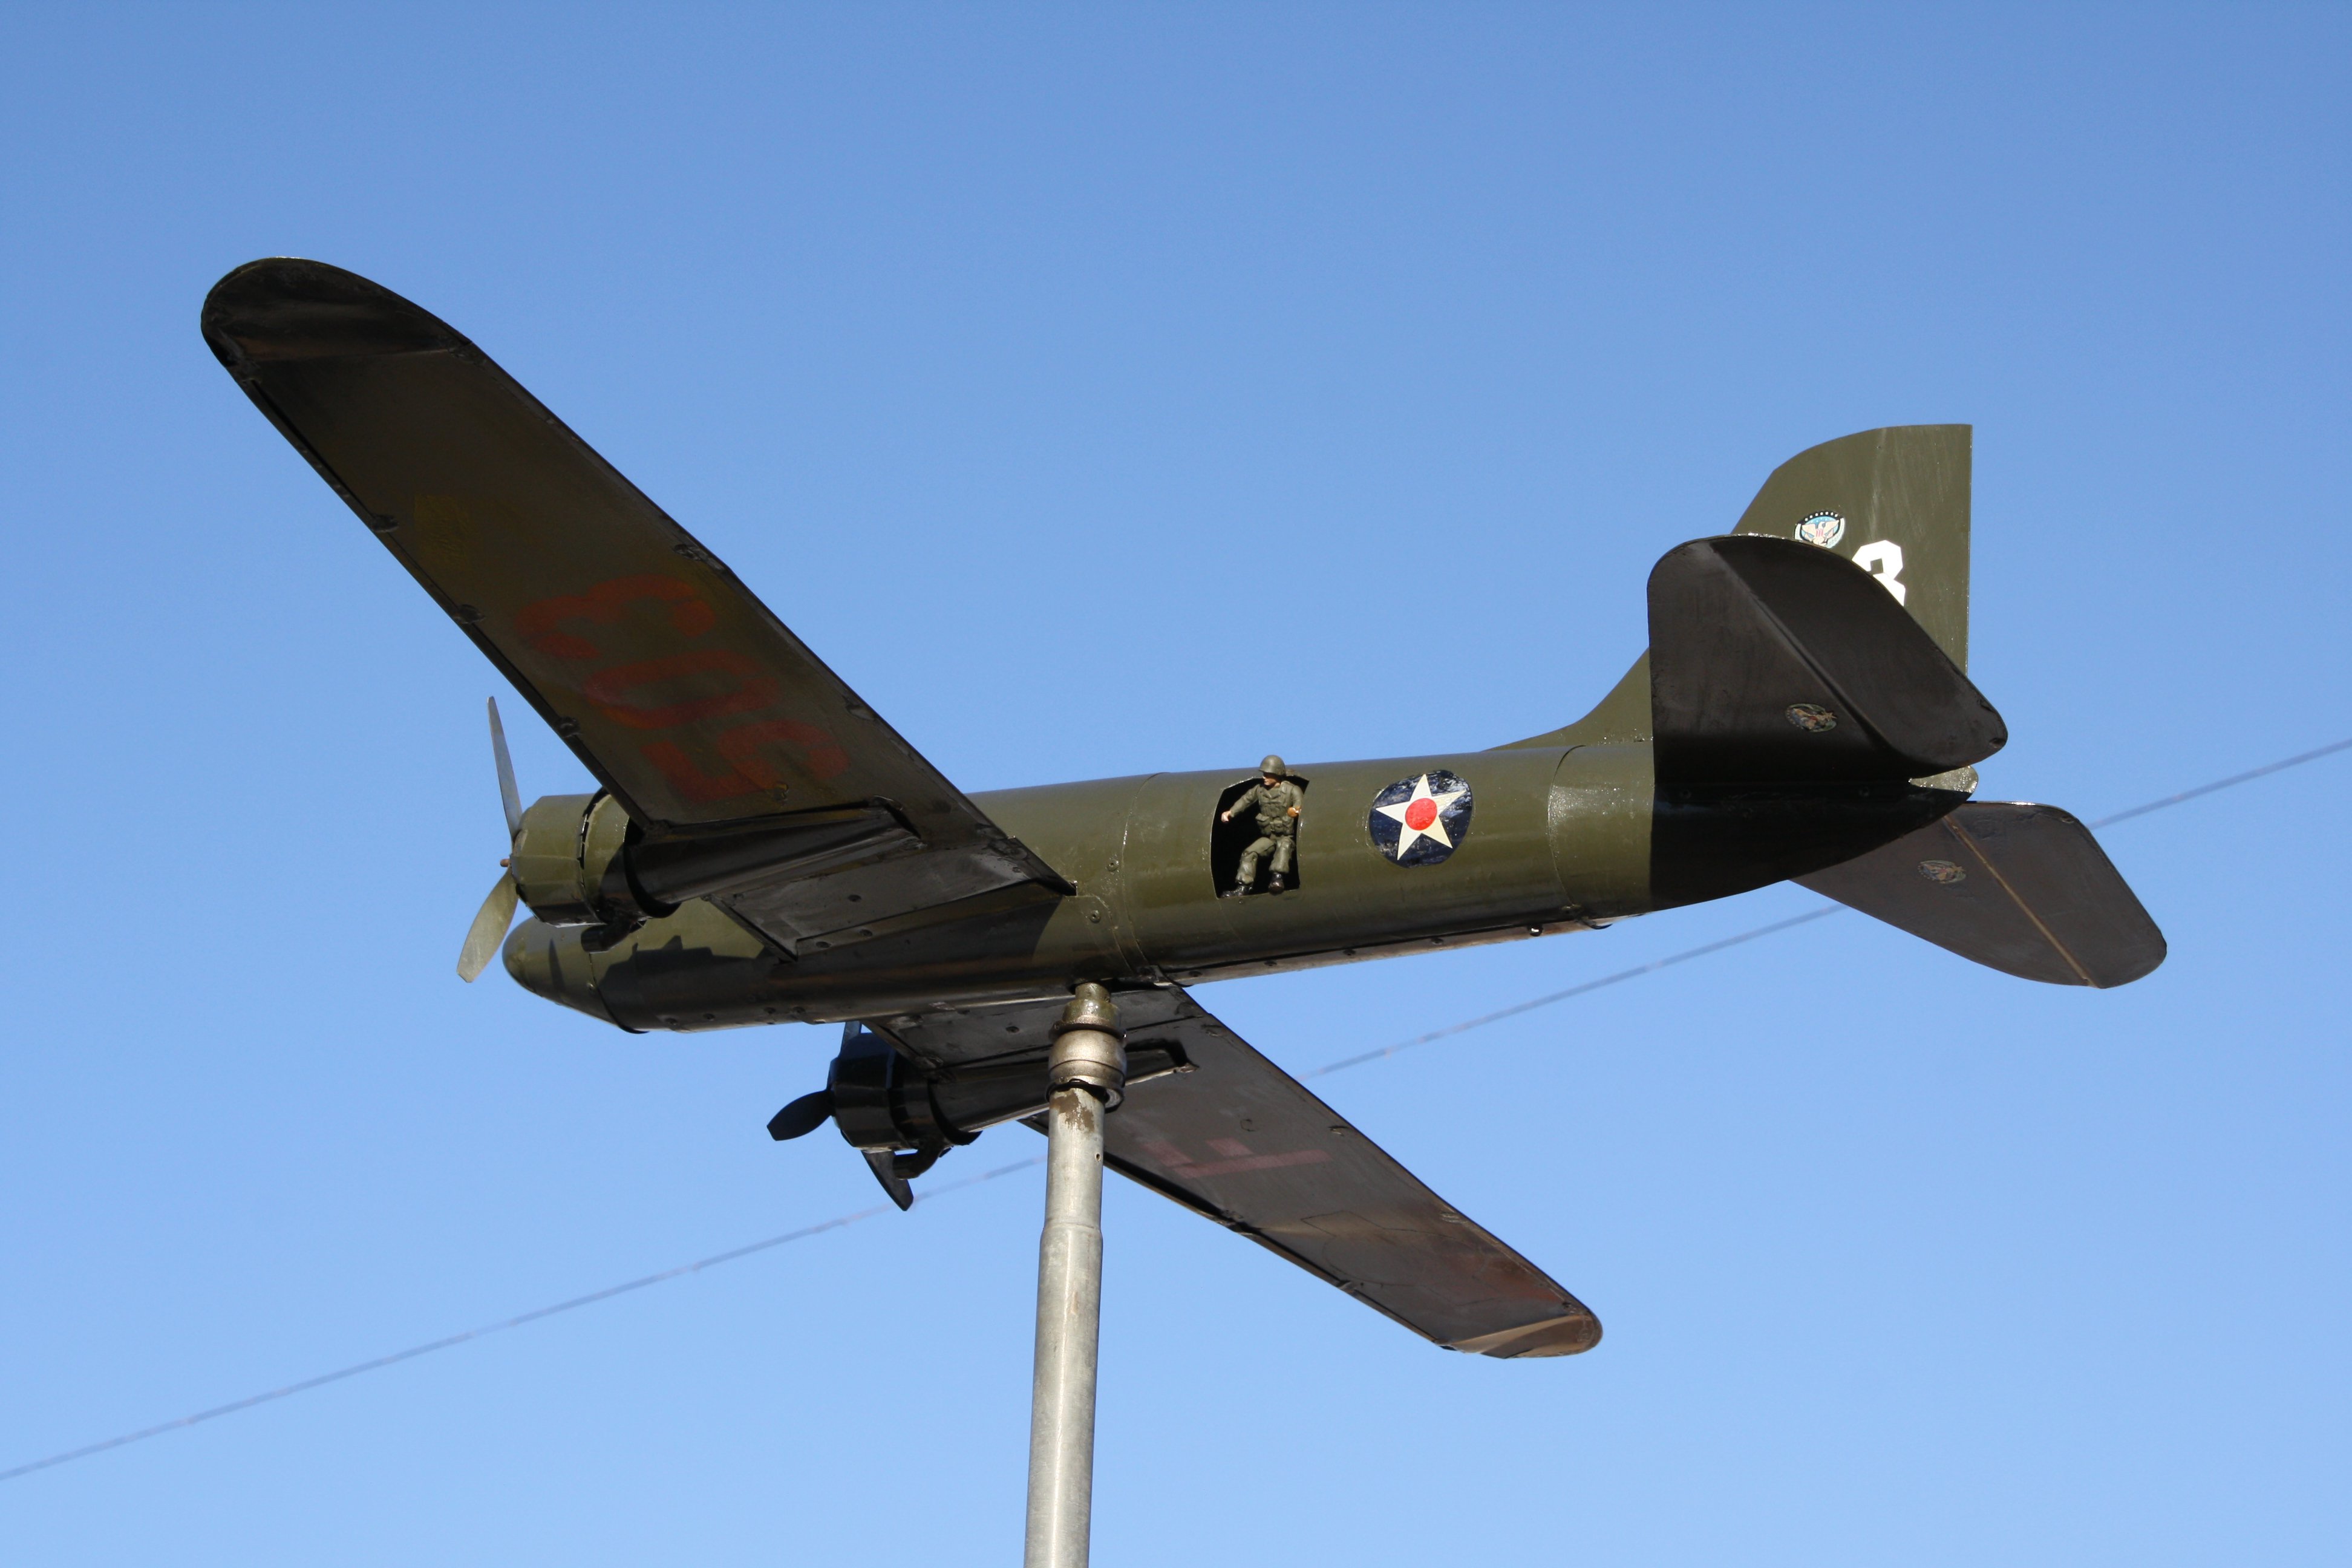 WWII Model Airplane with Paratrooper - Free High Resolution Photo - Dimensi...